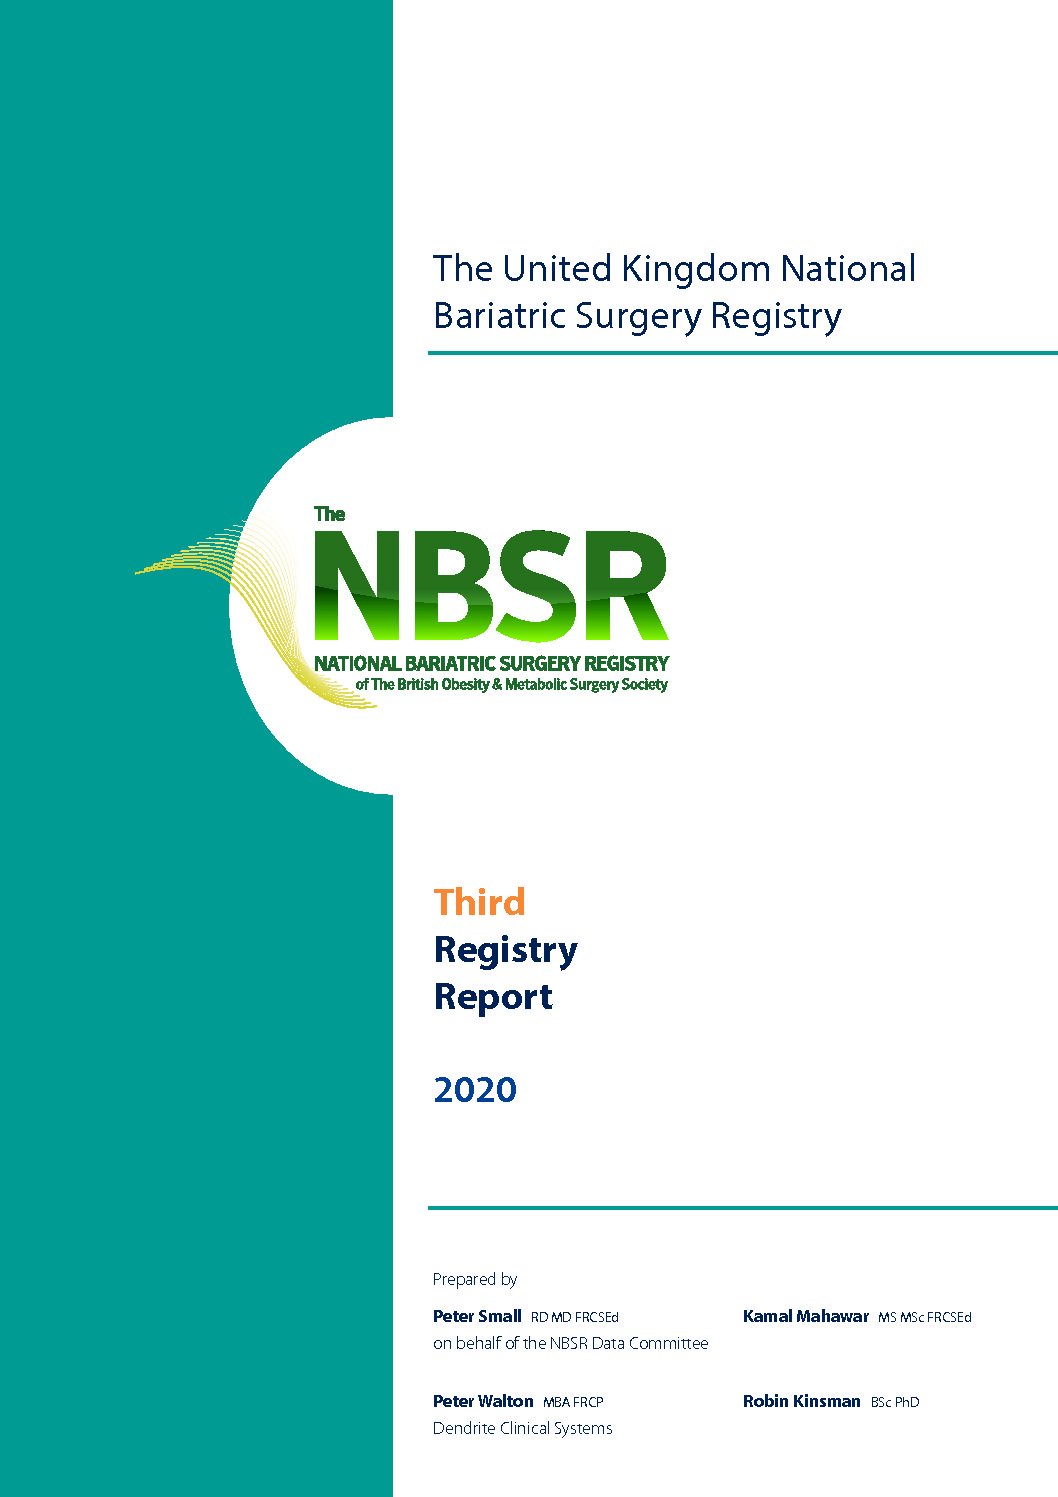 The United Kingdom National Bariatric Surgery Registry, Third Registry Report 2020